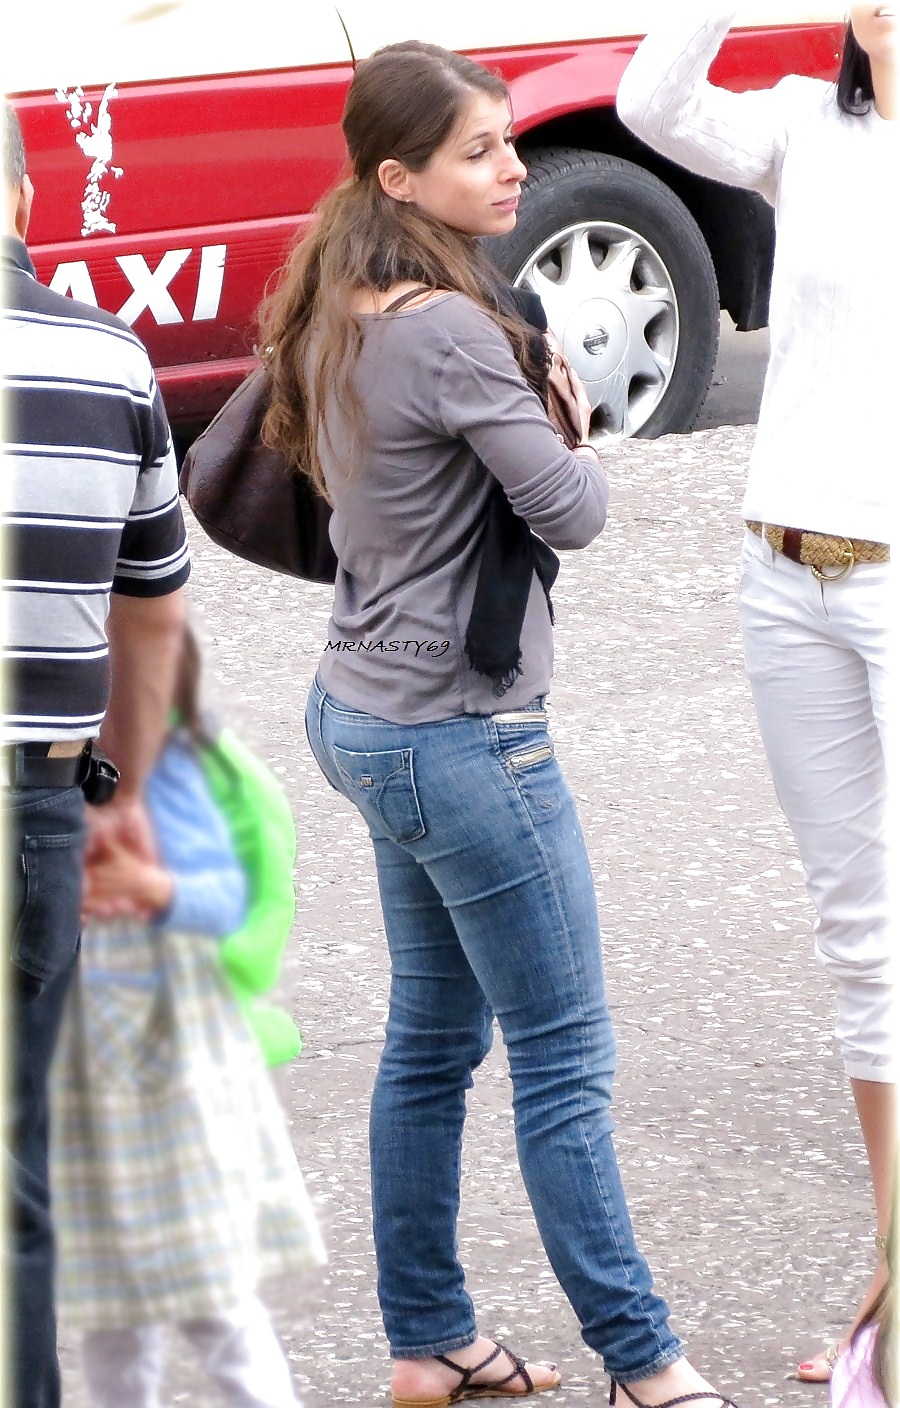 Wife In tight Jeans #6 #13284628